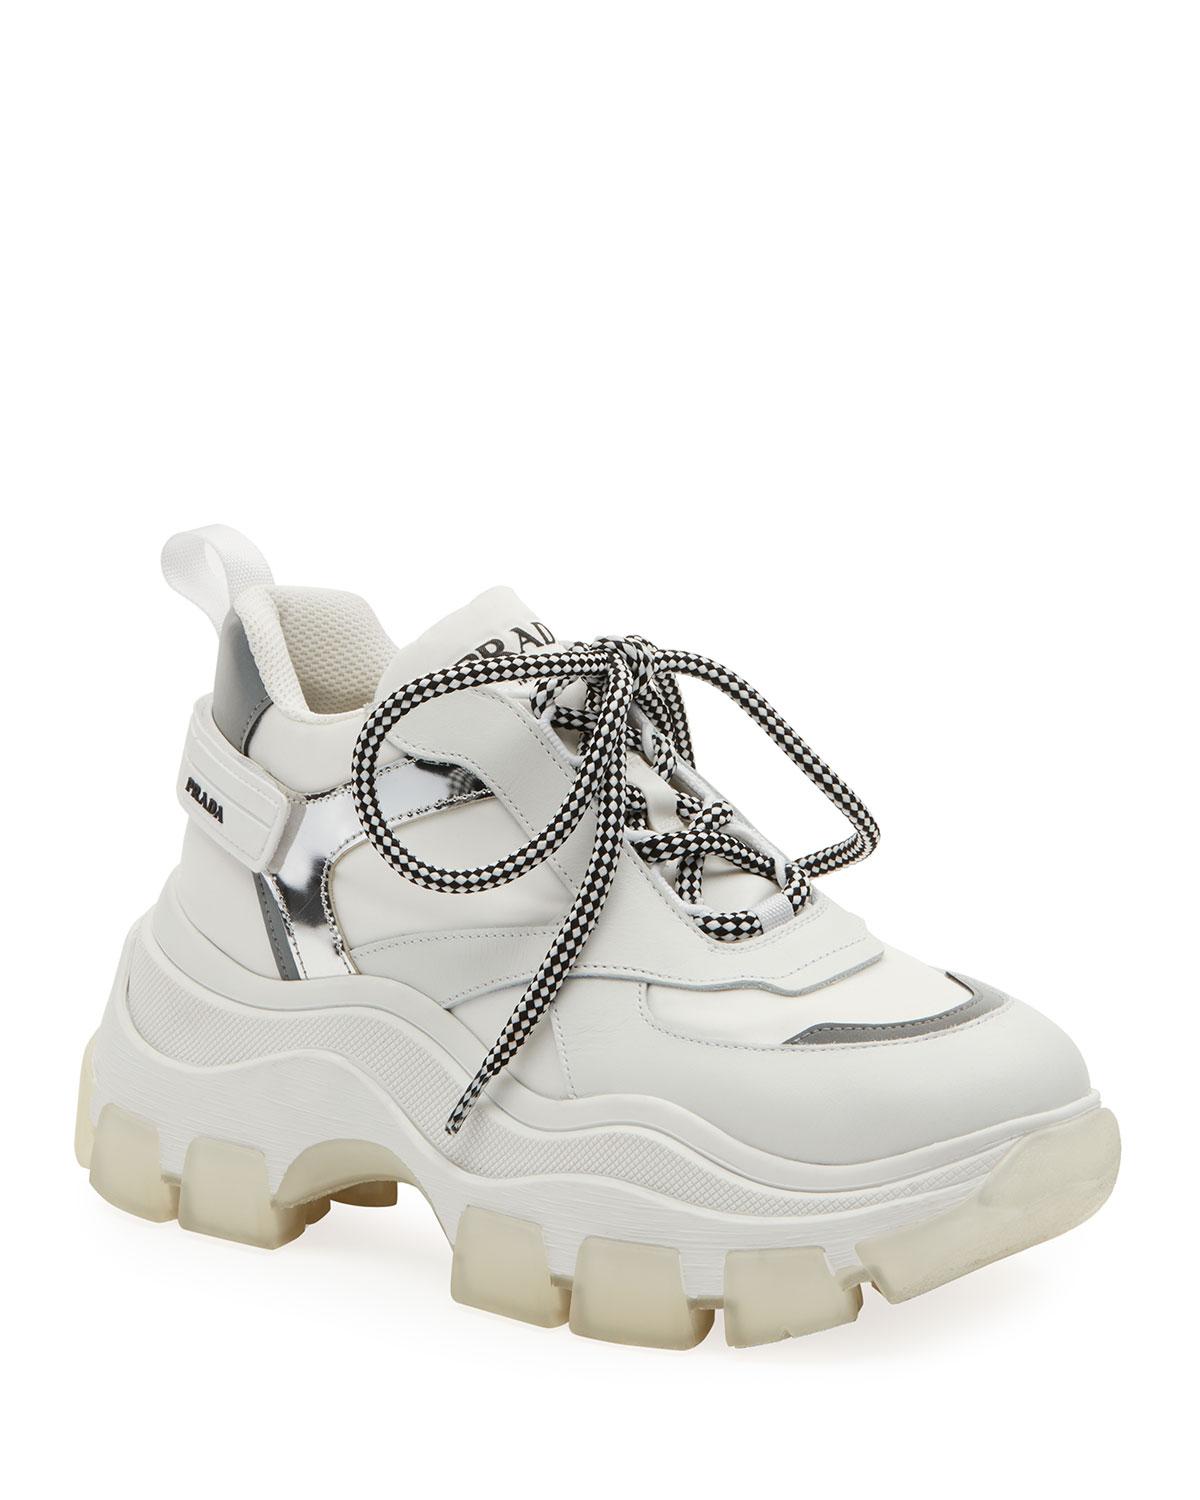 Prada Lace-up Chunky Platform Hiking Sneakers in White - Lyst